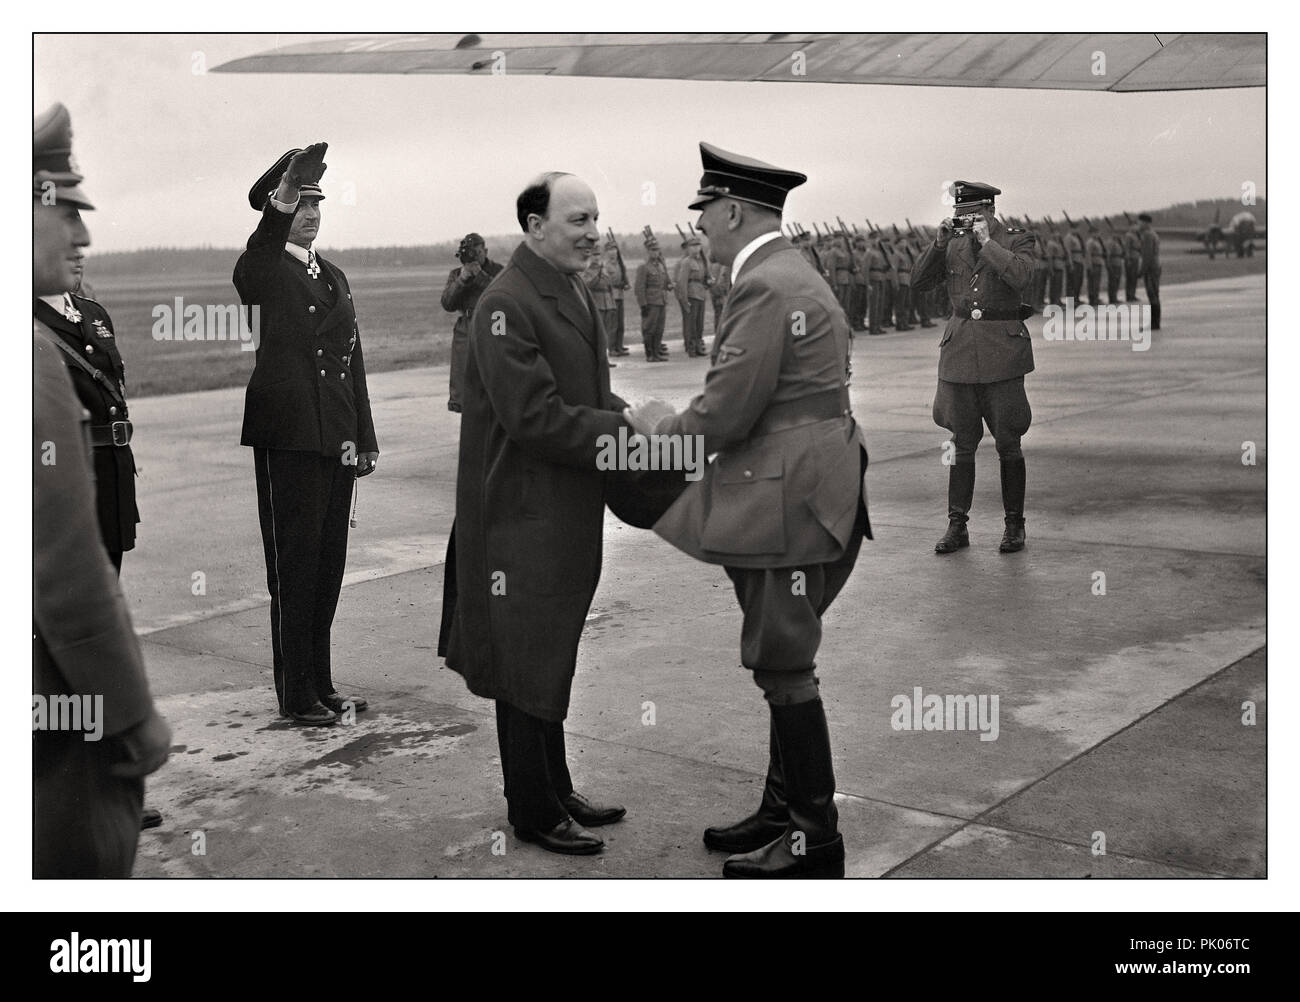 WW2 Adolph Hitler meeting President Ryti at Immola airport during a visit to Field Marshall Mannerheim June 1942 Nazi Wehrmacht Army press photographer behind using a German 35mm Leica IIIa Camera to record the event. Stock Photo